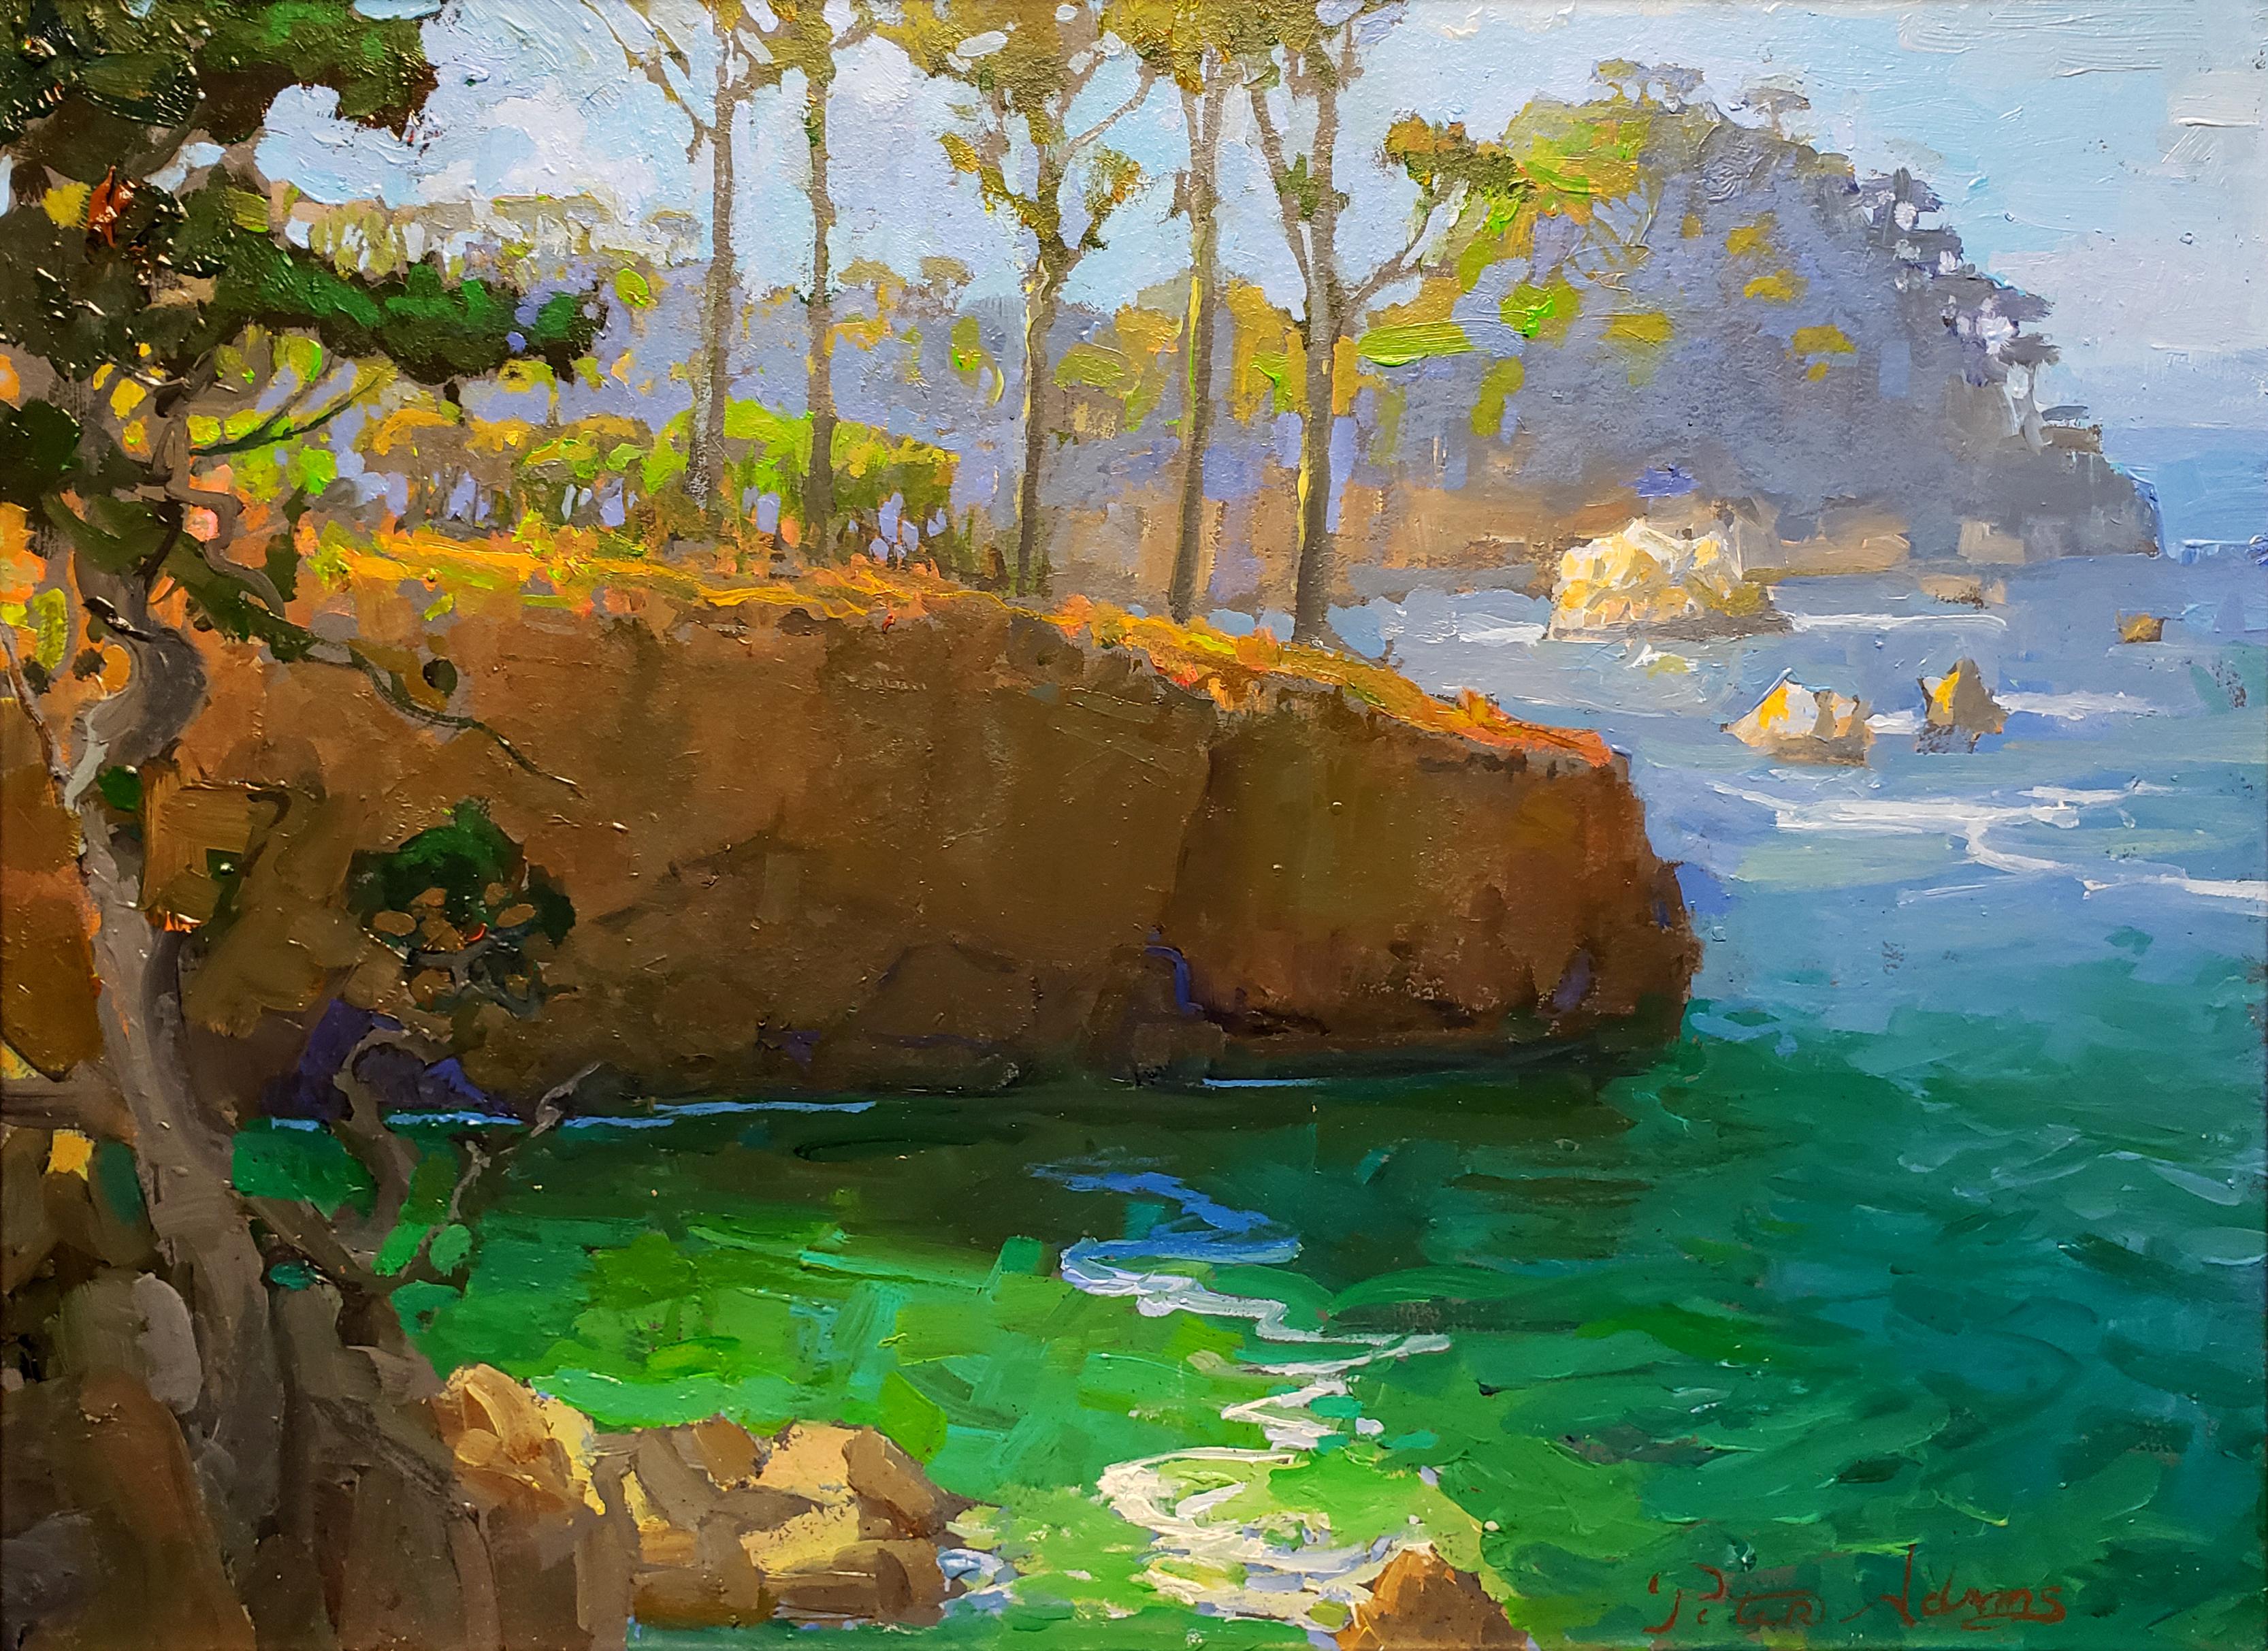 Afternoon at Whaler's Cove, Point Lobos, California - Painting by Peter Adams